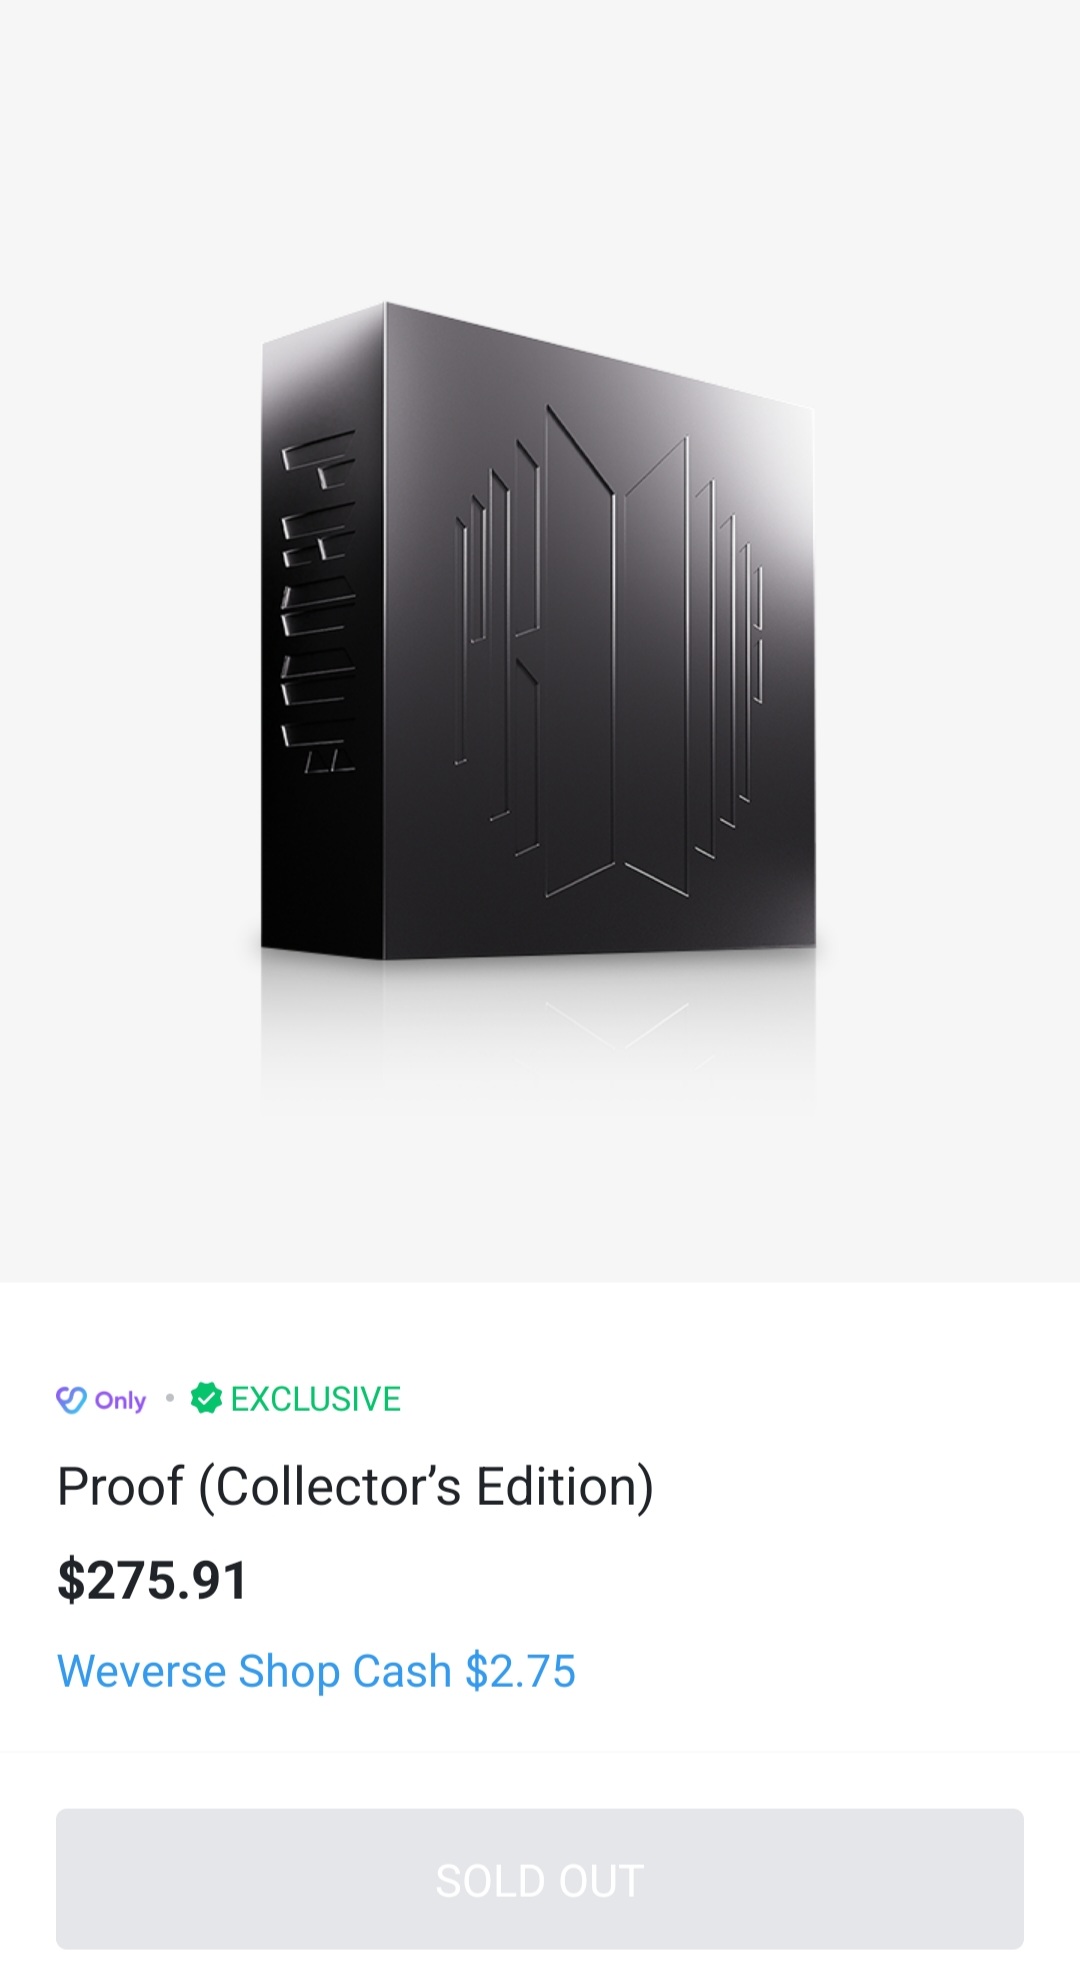 BTS (방탄소년단) 'Proof (Collector's Edition)' SOLD OUT - Pantip